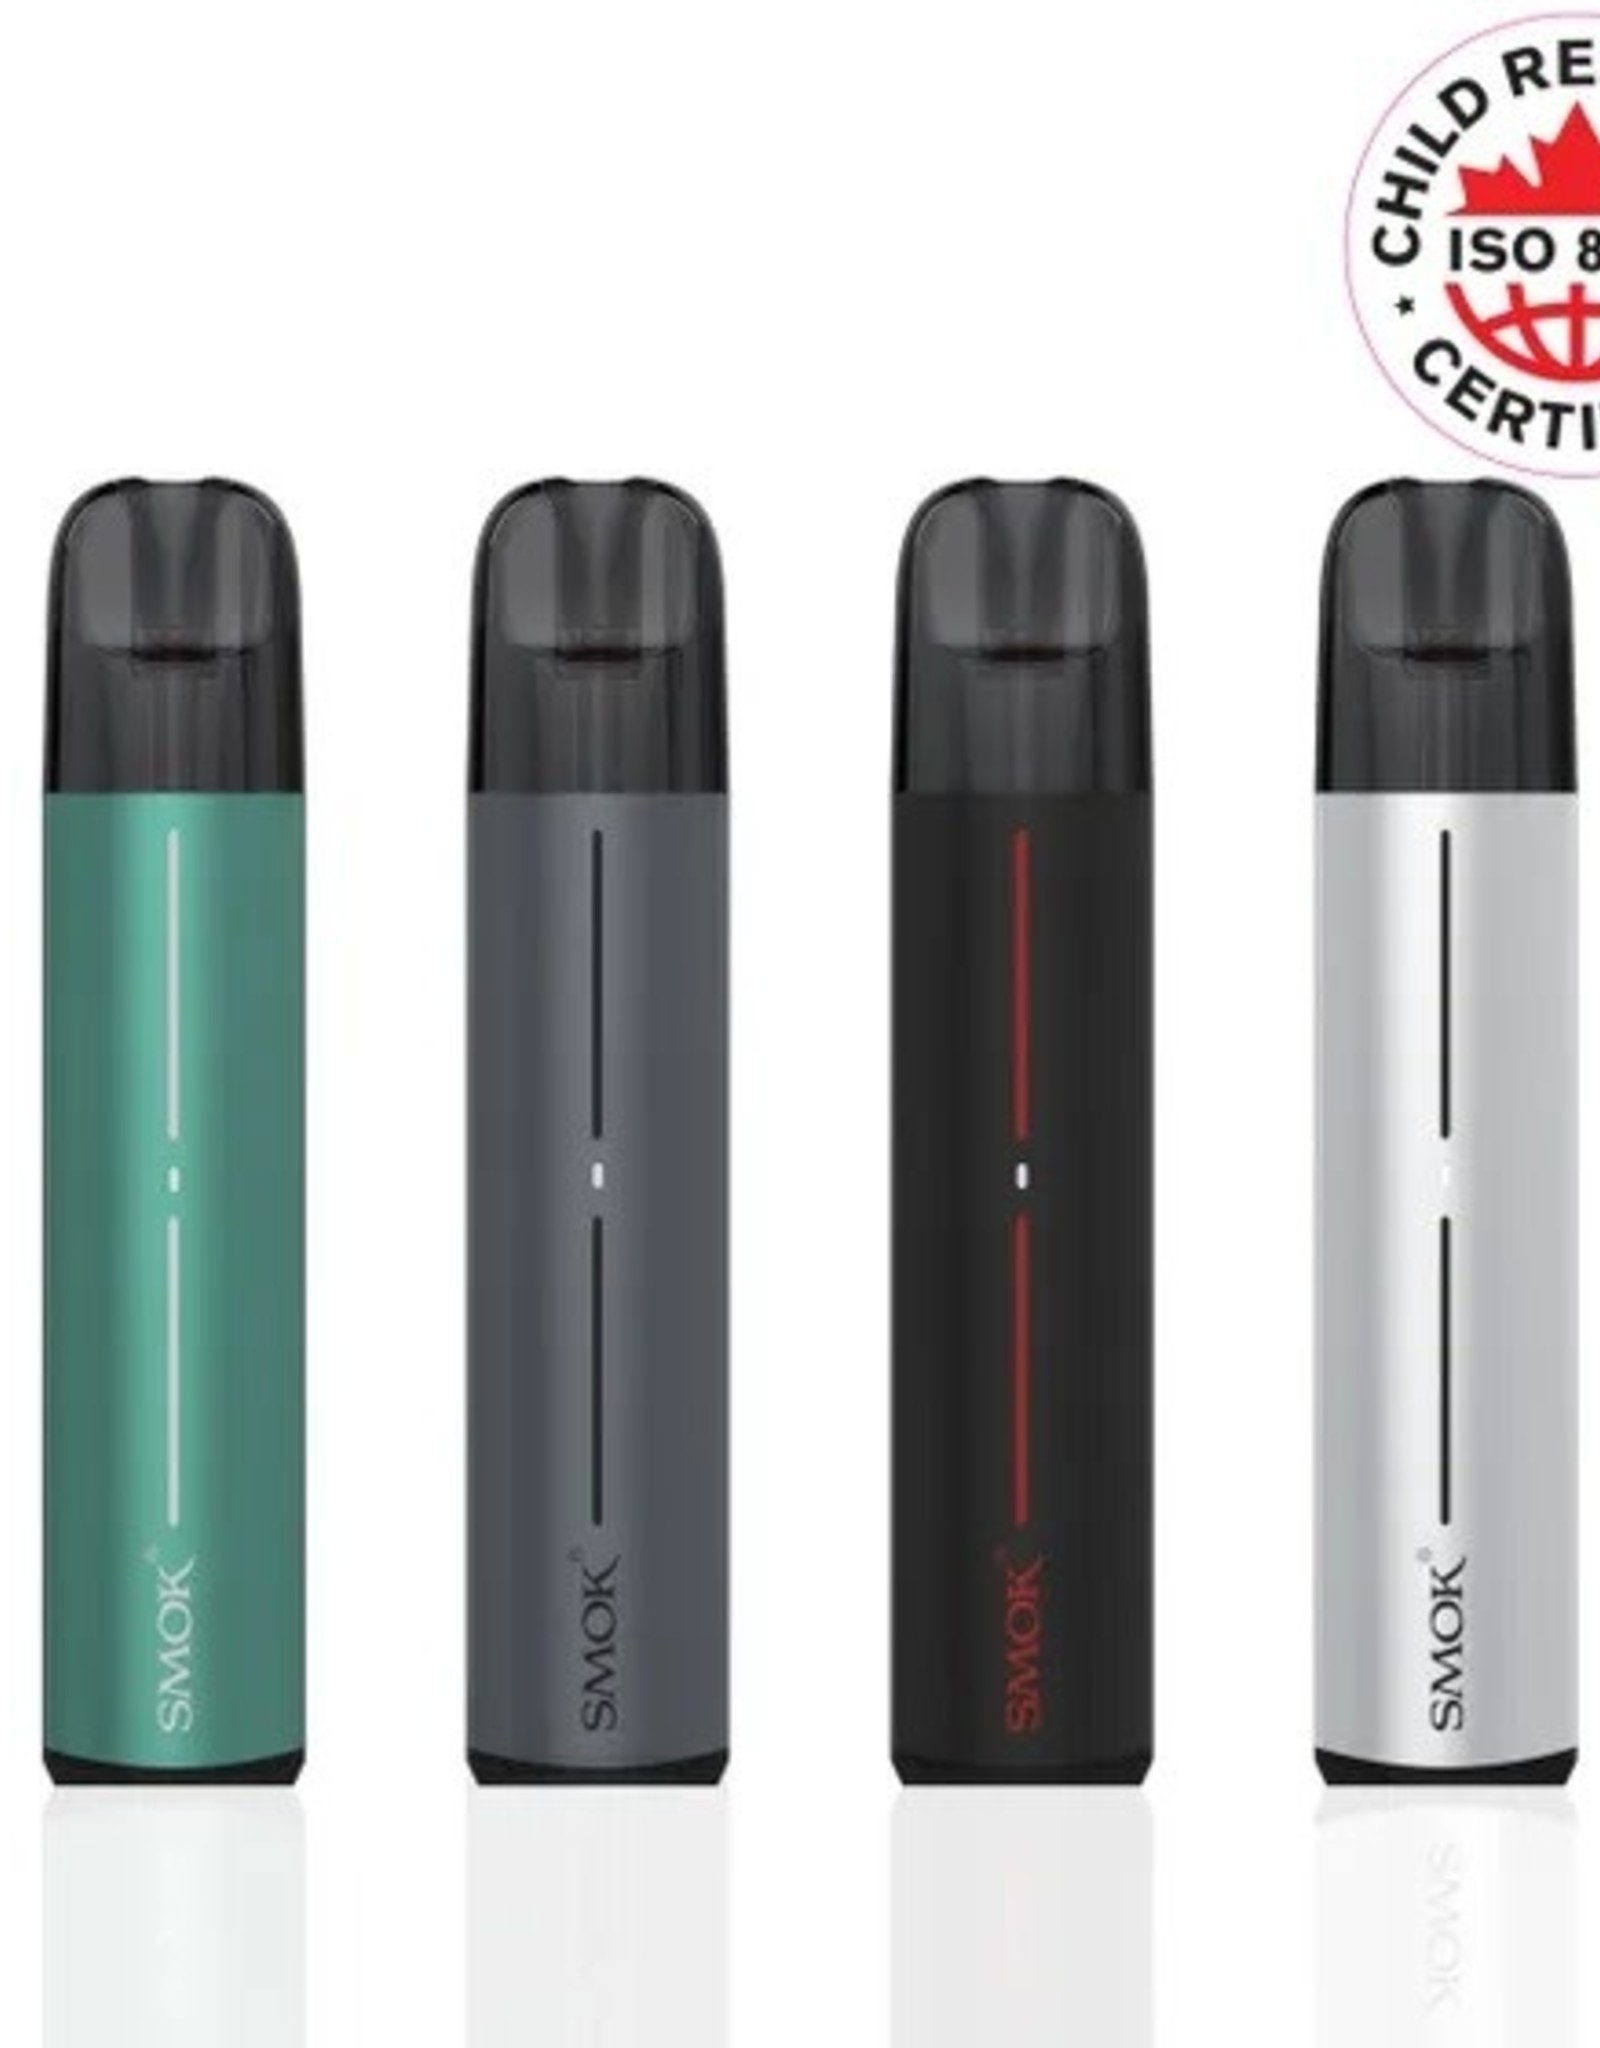 Smok Smok Solus 2 Open Pod Kit [CRC Version]Smok Solus 2 Open Pod Kit [CRC Version] SIX COLORS AVAILABLE Both RDL and MTL are available Type-C charging   MOD / POD / DISPOSABLE SPECIFICATIONS Size: 107 height (mm) X 21.5 width (mm) X 13 length (mm) Weight: 40